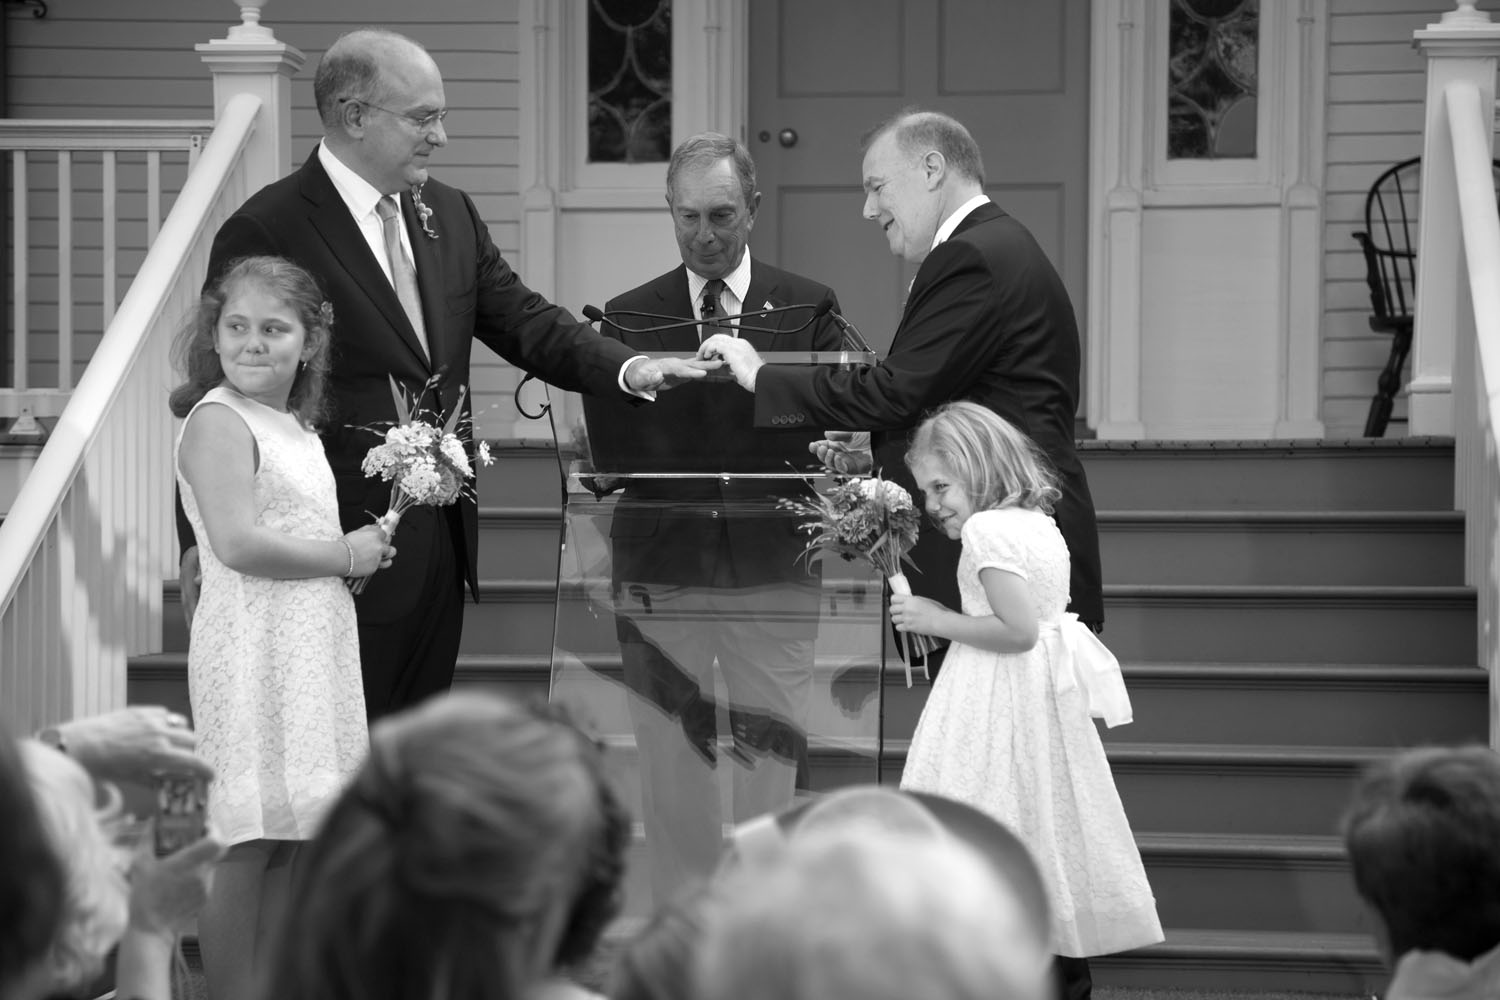 New York City Mayor Michael Bloomberg officiated a wedding ceremony between his Chief Policy Advisor and Criminal Justice Coordinator John Feinblatt and the Department of Consumer Affairs Commissioner Jonathan Mintz. The ceremony was held at Gracie Mansion on the Upper East Side.